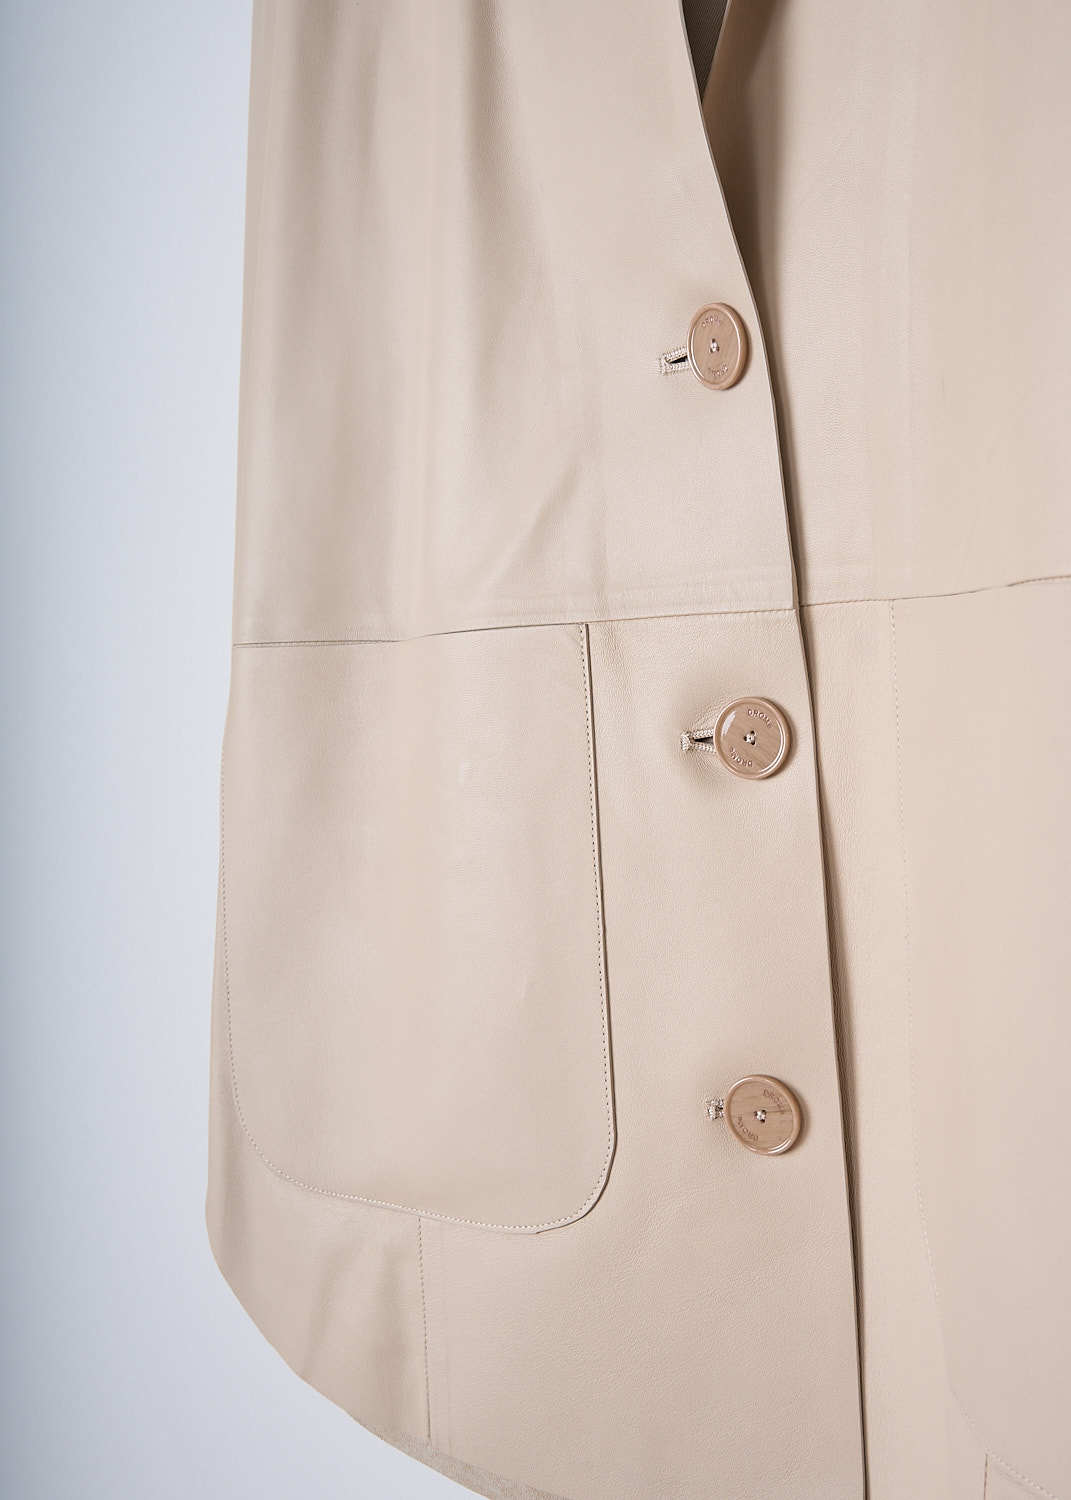 DROME, BOXY BEIGE LEATHER JACKET, DPD3112V_D400_B363, Beige, Detail, This single-breasted beige leather jacket has a notched lapel and a front button closure. The jacket has a boxy silhouette. On the front, the jacket has two patch pockets. The jacket has a rounded hemline. 
